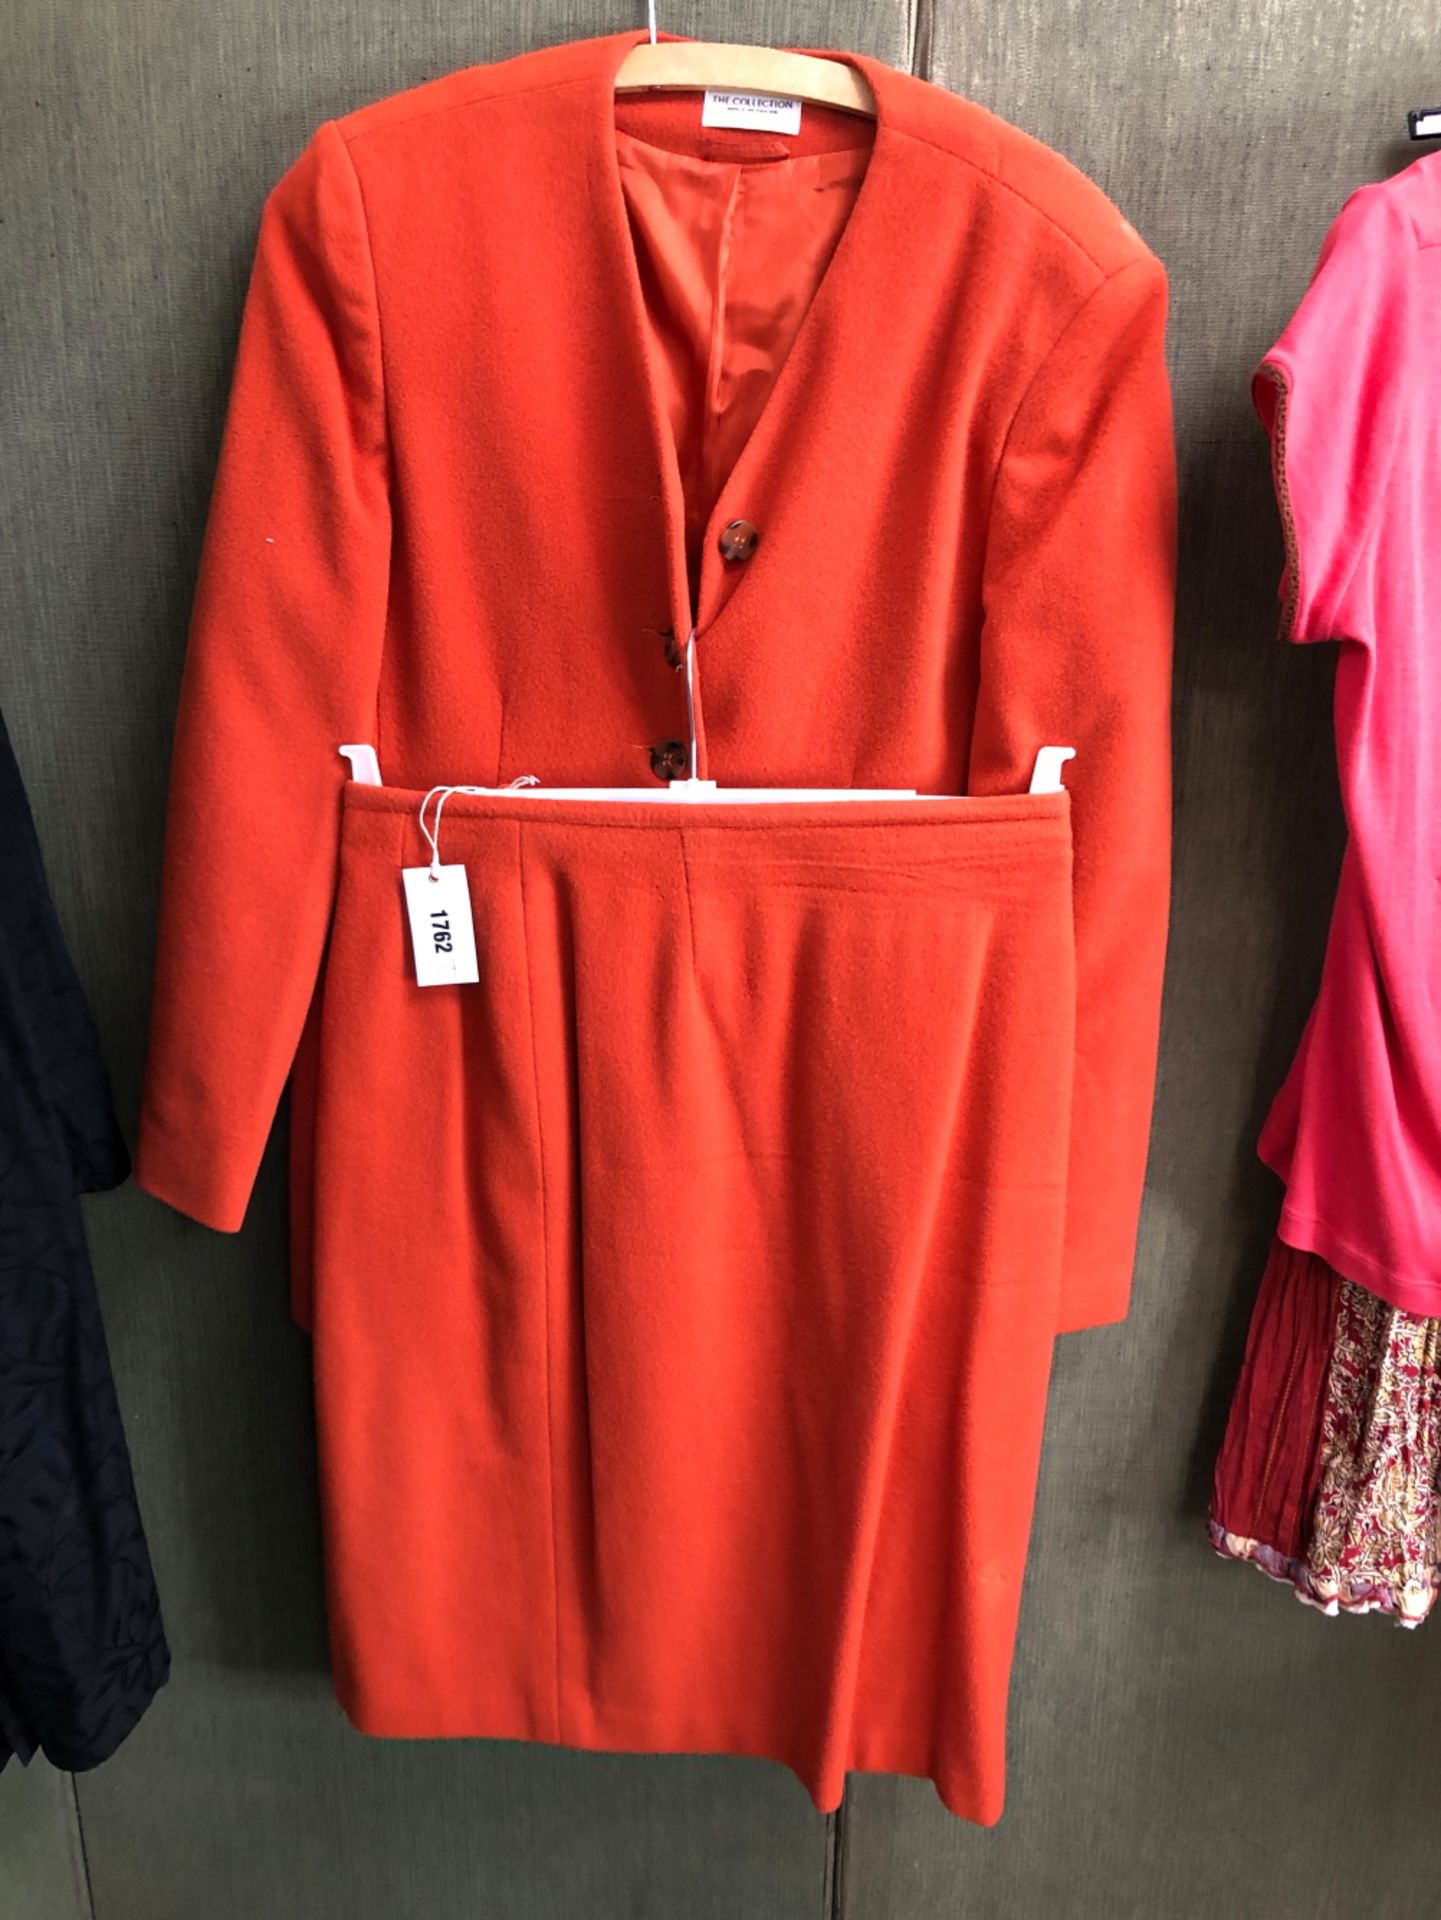 SUIT JACKET AND SKIRT, THE COLLECTION HOUSE OF FRASER, ORANGE, SLEEVES 36.5cms, ARMPIT TO ARMPIT - Image 5 of 10